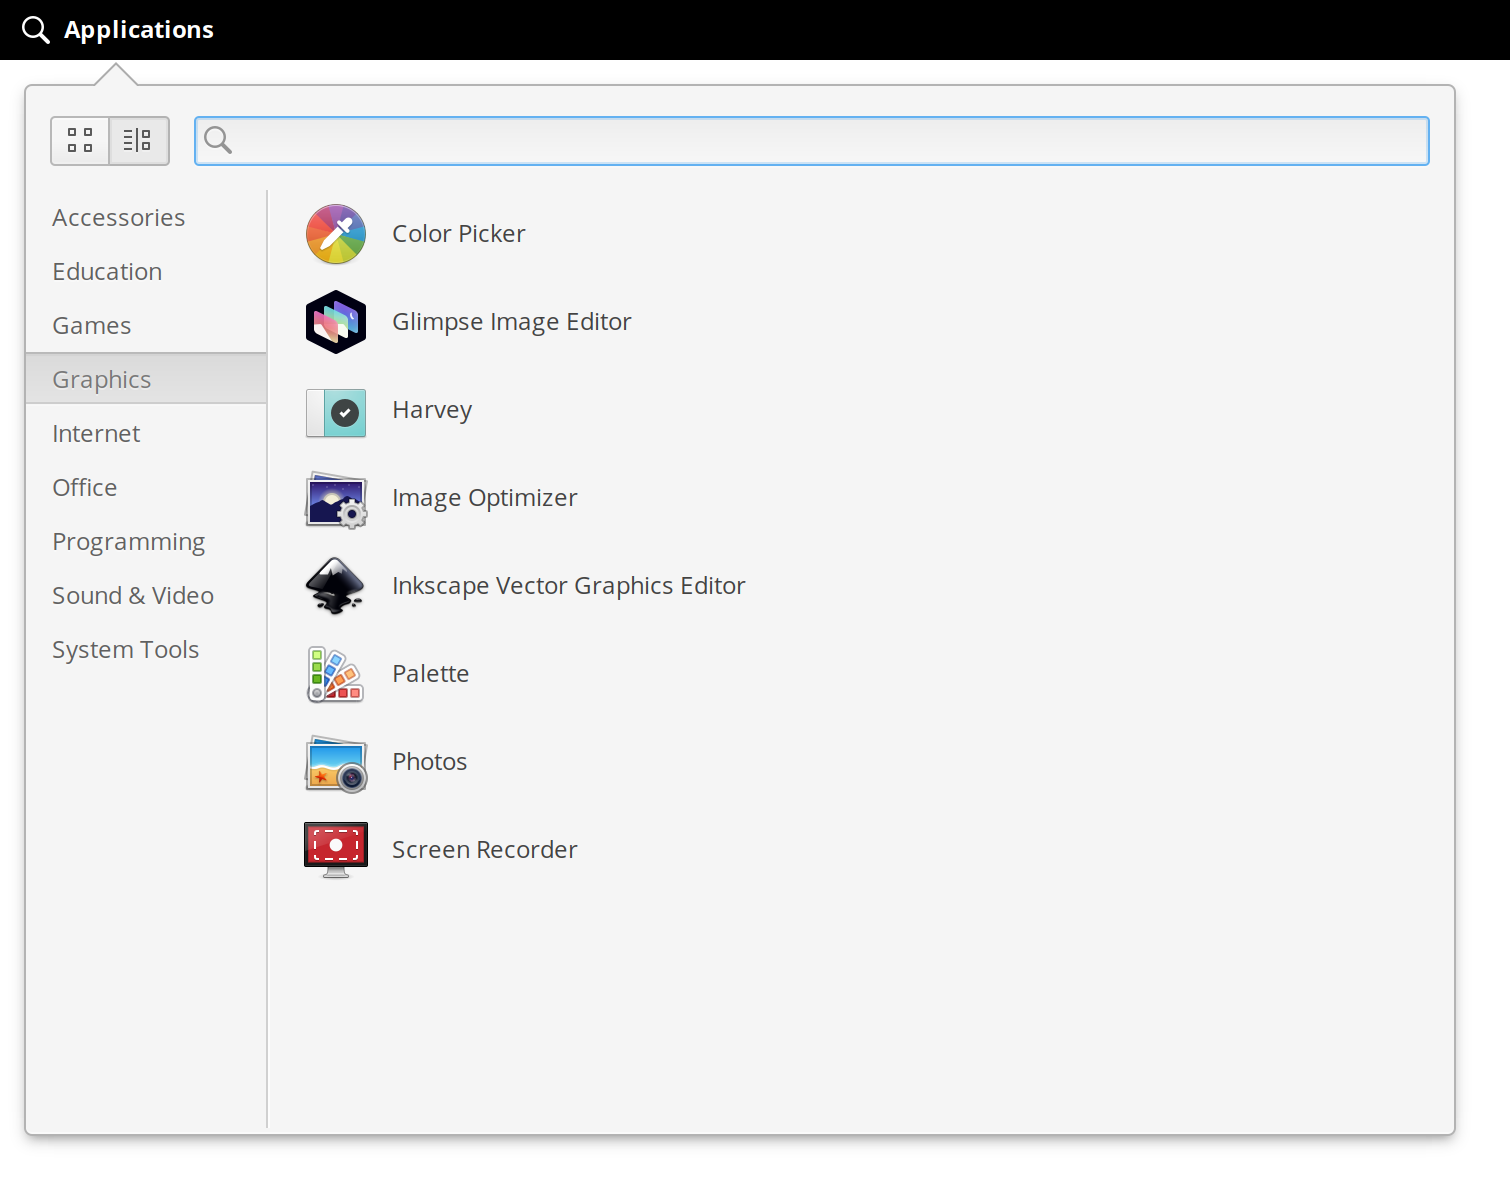 Redesigned applications menu category view